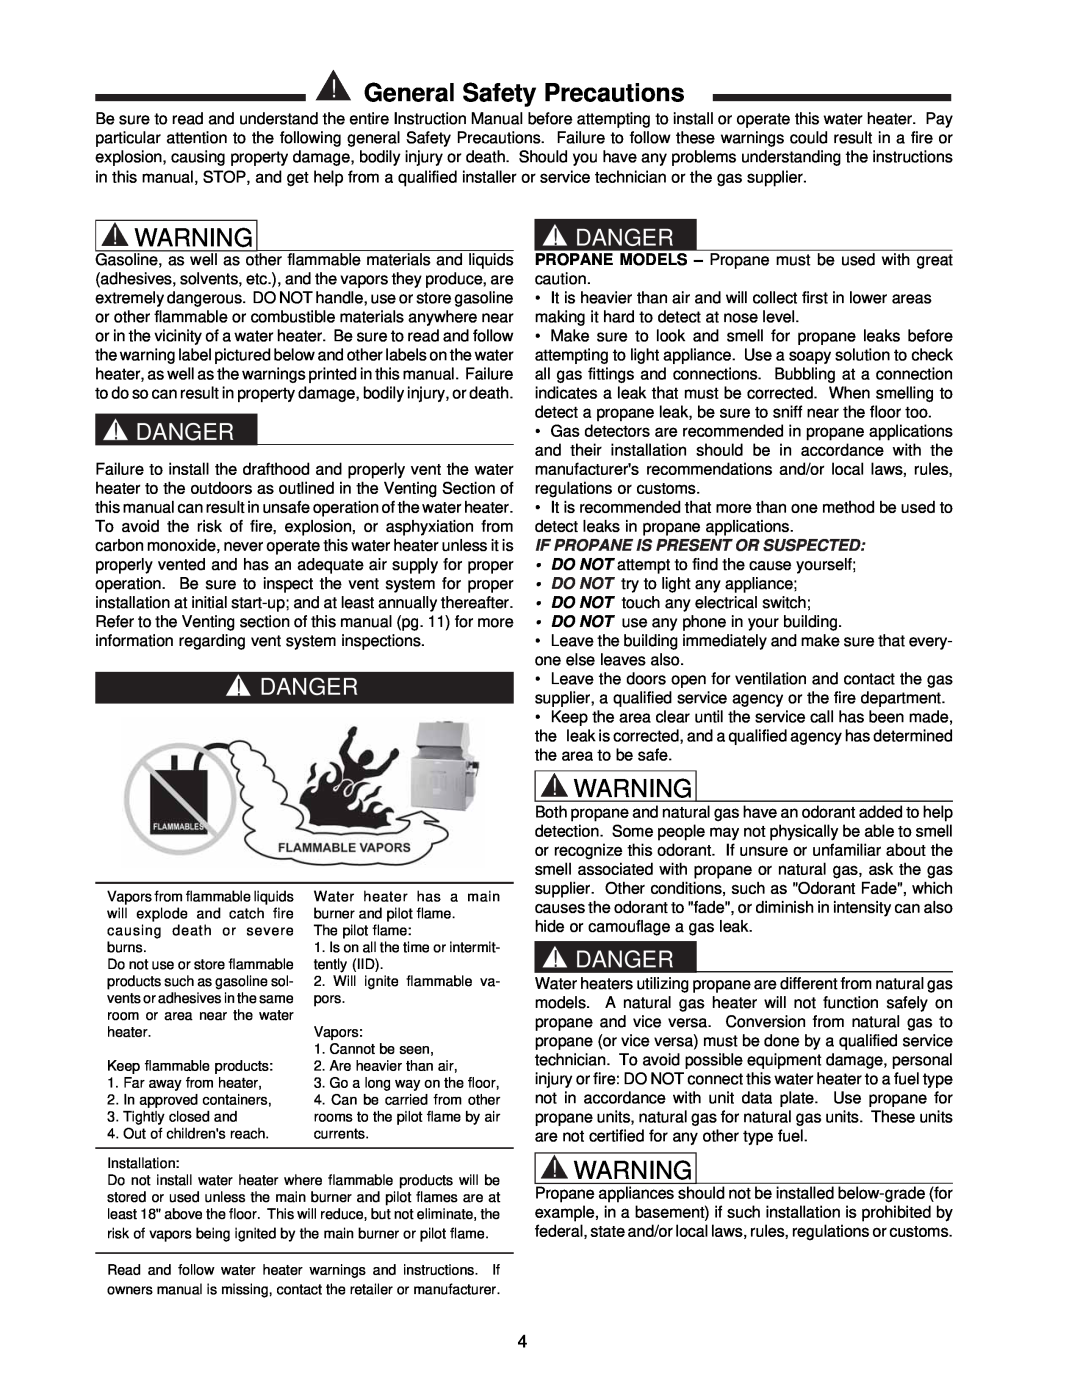 Raypak 0133-4001 manual General Safety Precautions, Danger, If Propane Is Present Or Suspected 